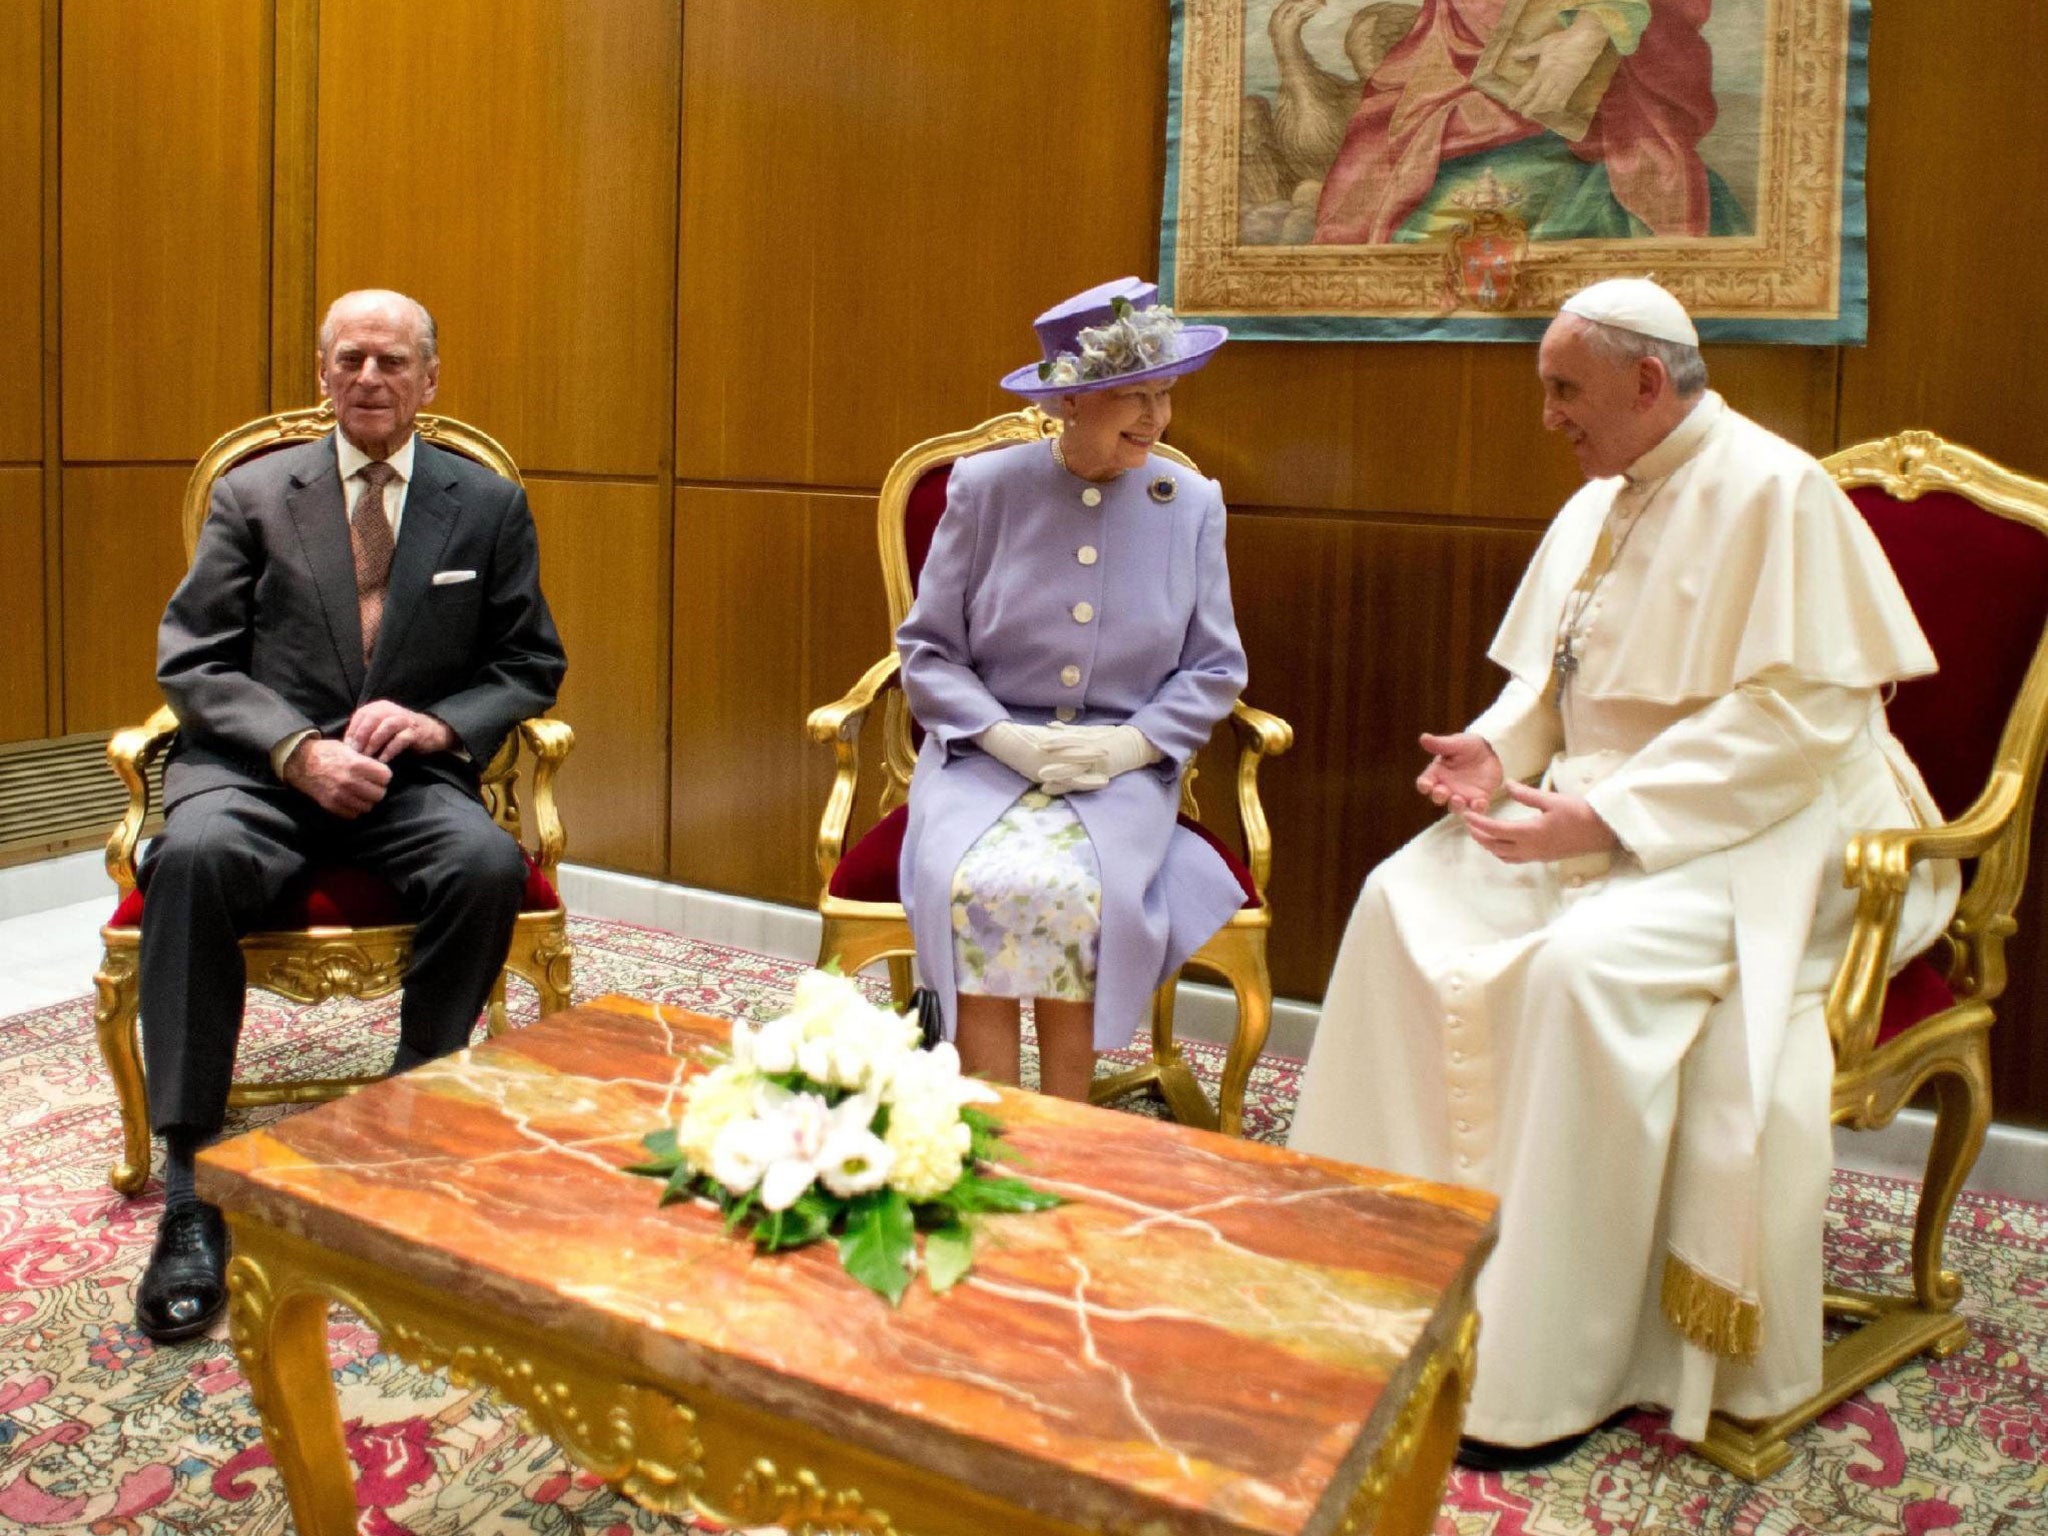 Britain's Queen Elizabeth II,87, talks to 77 year old Pope Francis during a meeting at the Vatican